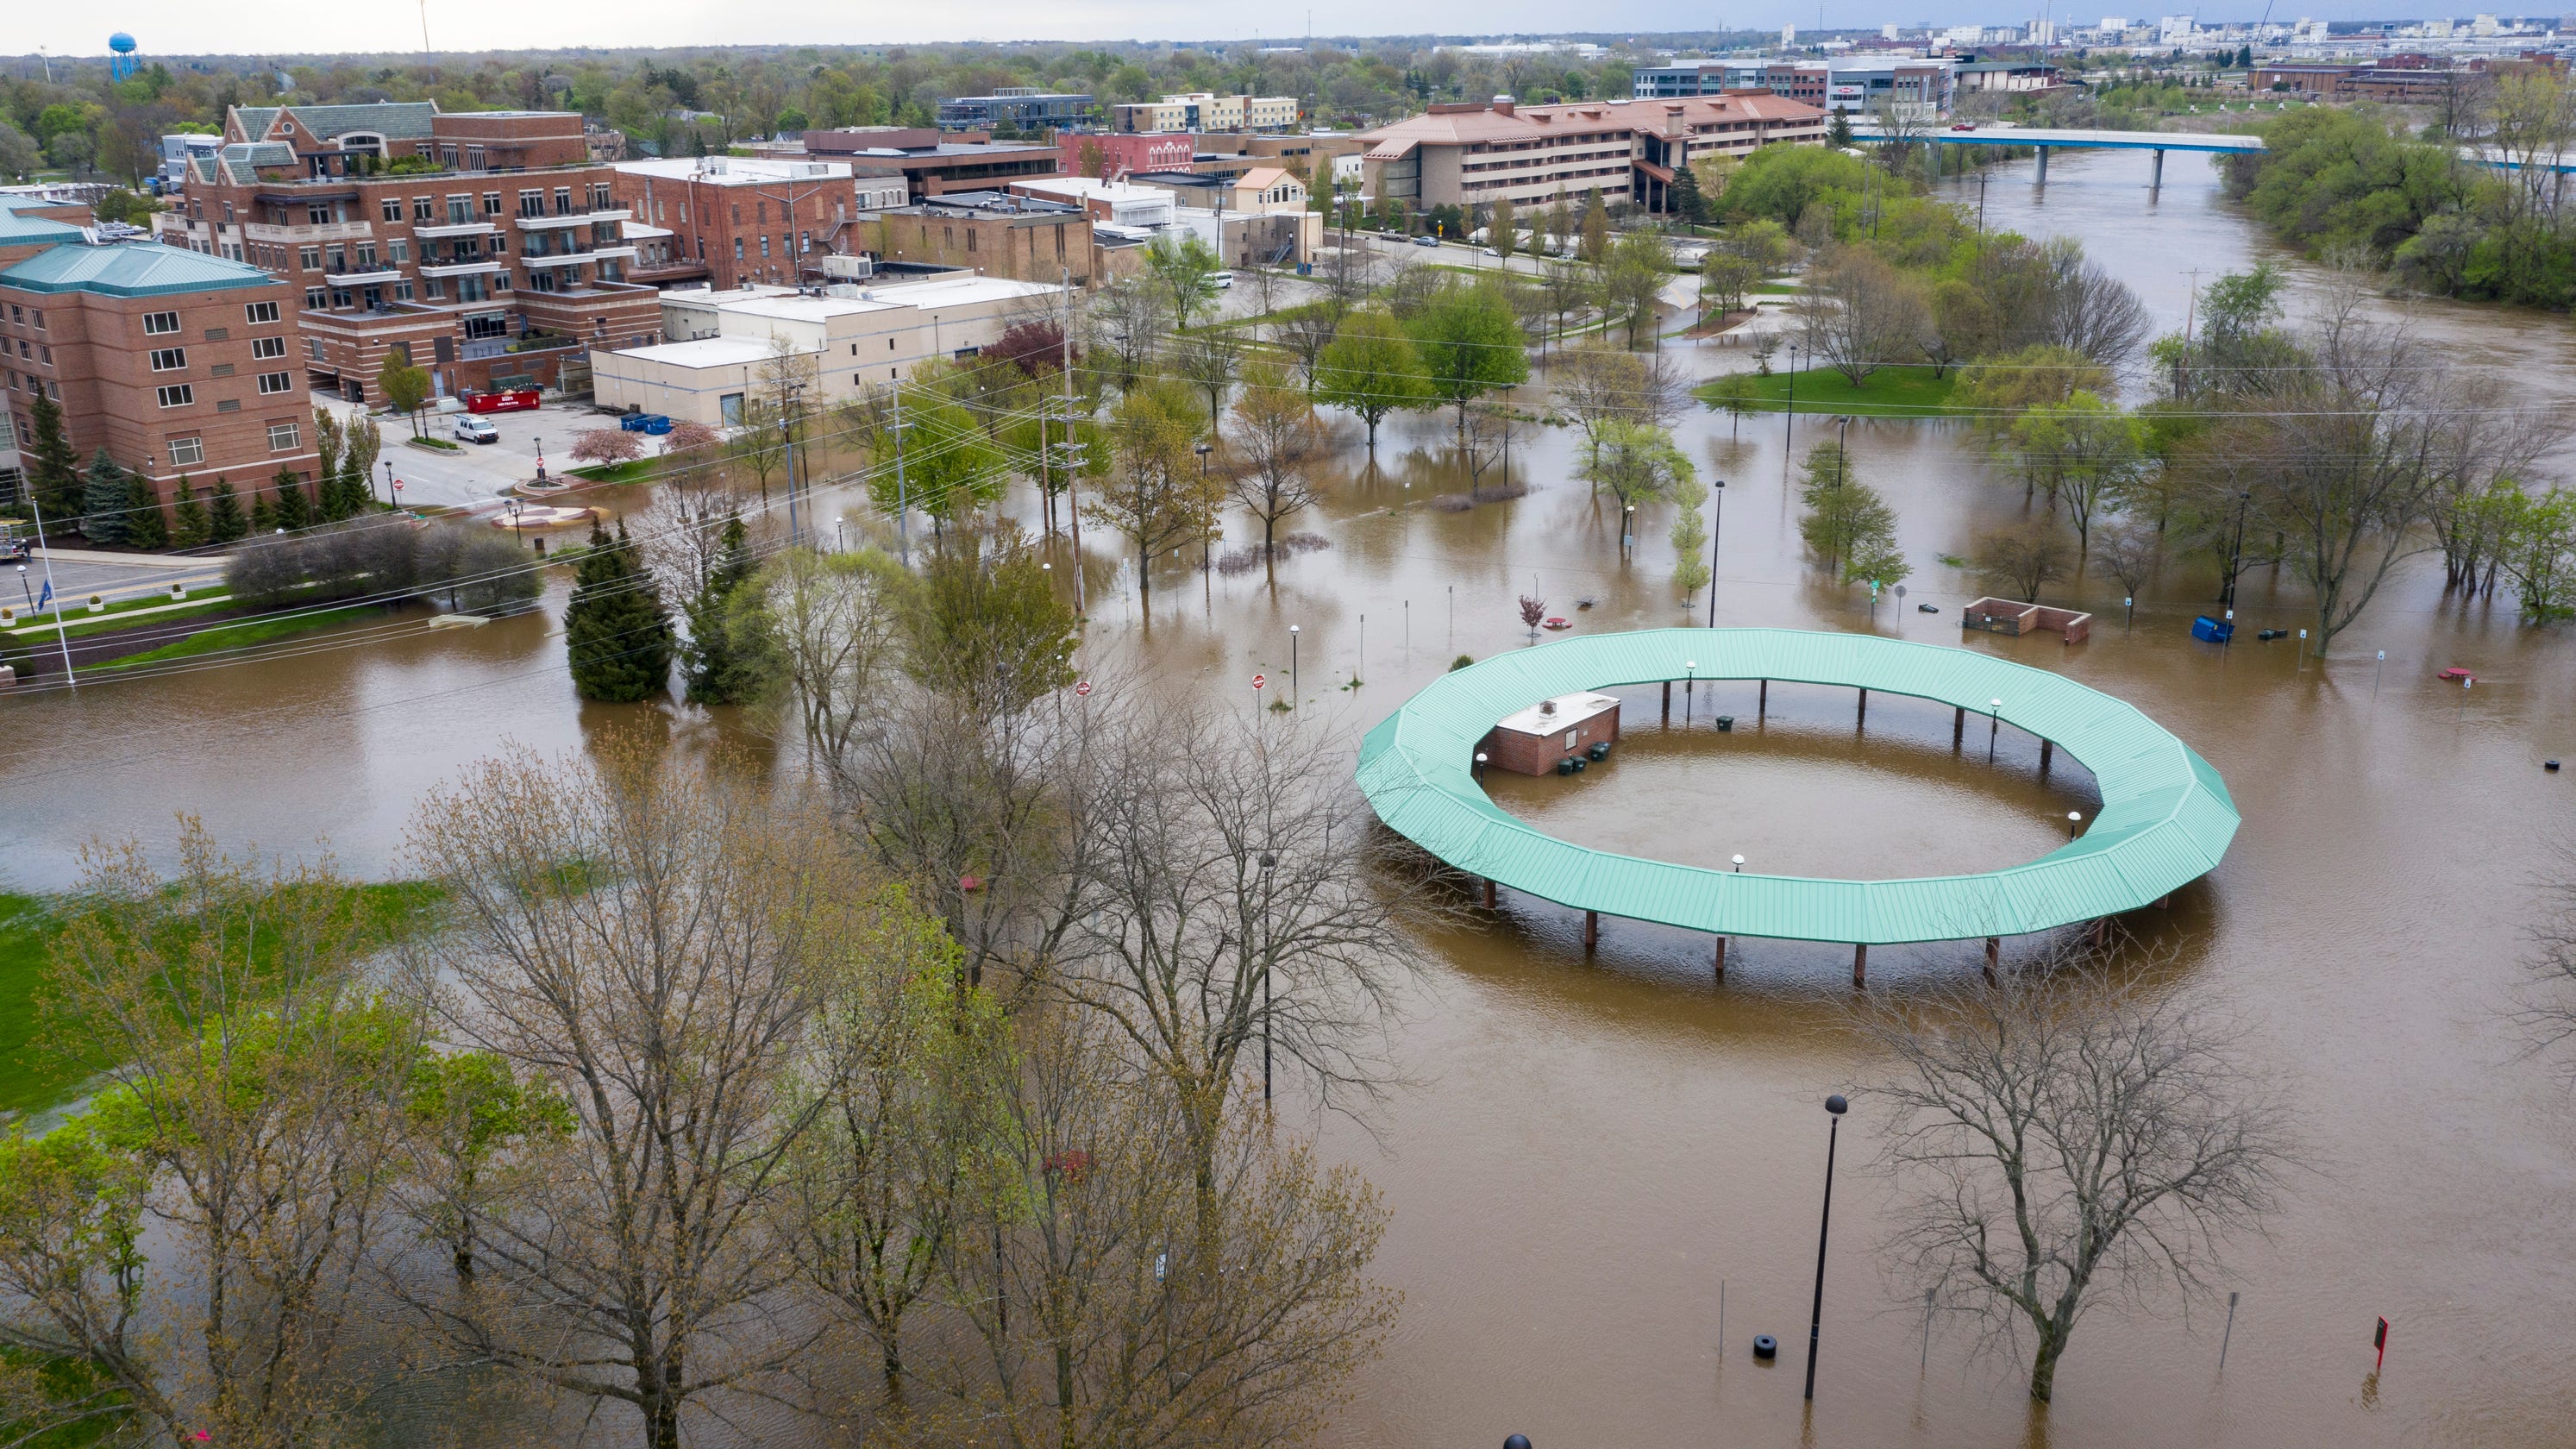 Editorial: Dam disaster enabled by government failures - The Detroit News